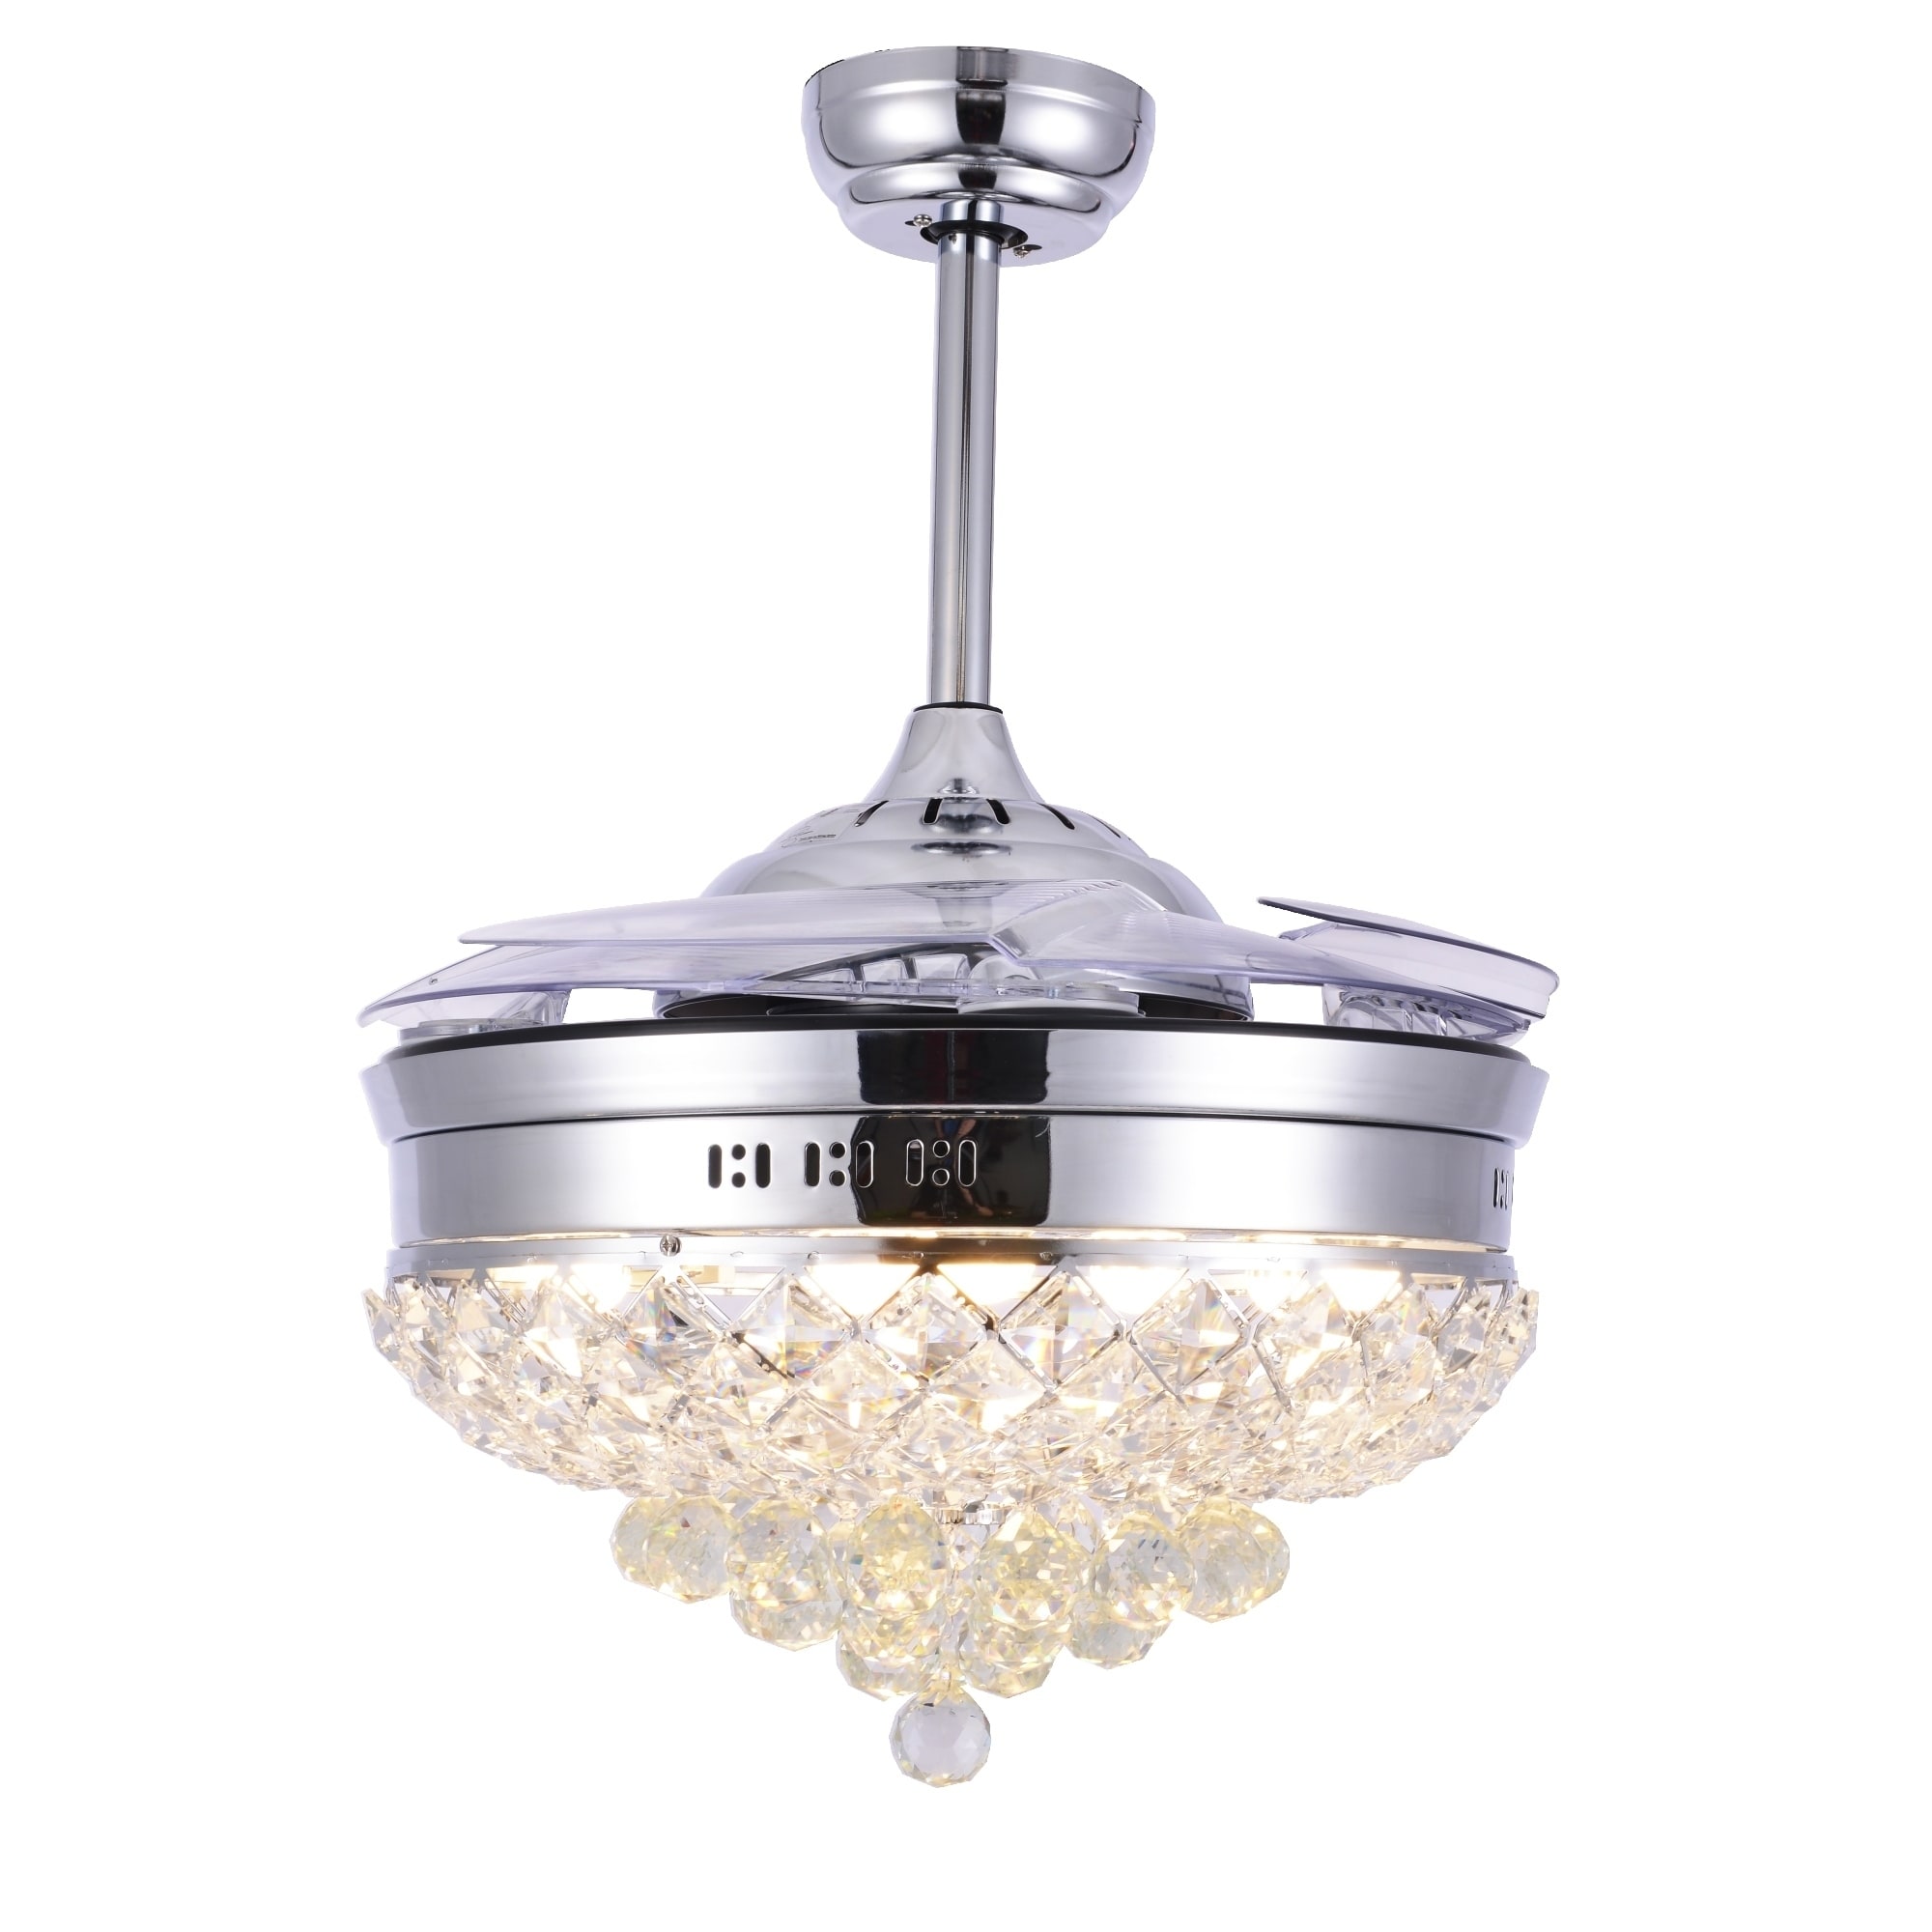 Crystal Ceiling Fan With Retractable Blades Led Light And Remote 42 Inches